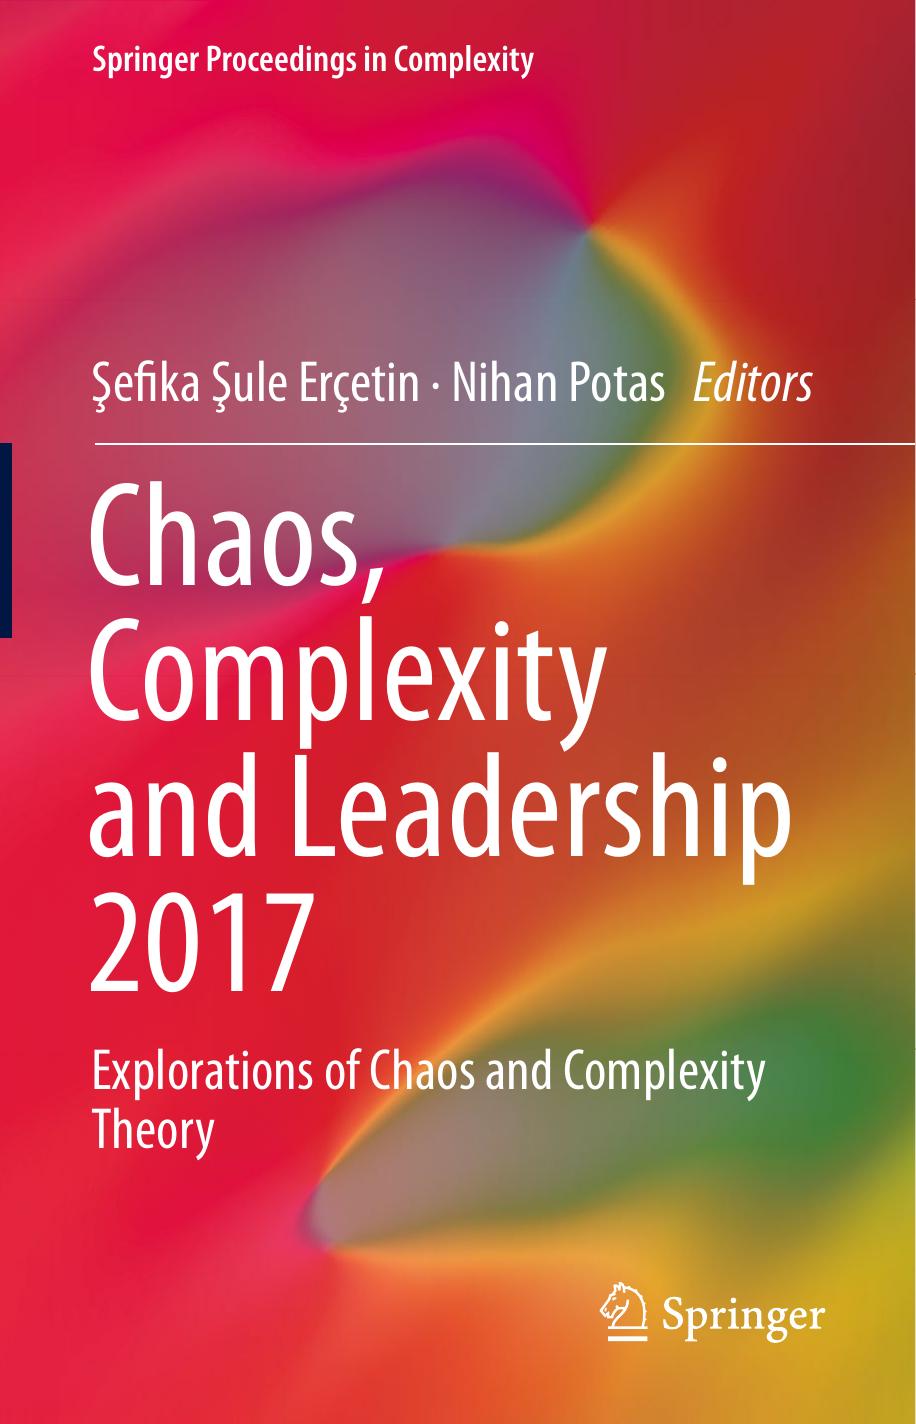 Chaos, Complexity and Leadership 2017  Explorations of Chaos and Complexity Theory ( PDFDrive ) 2019